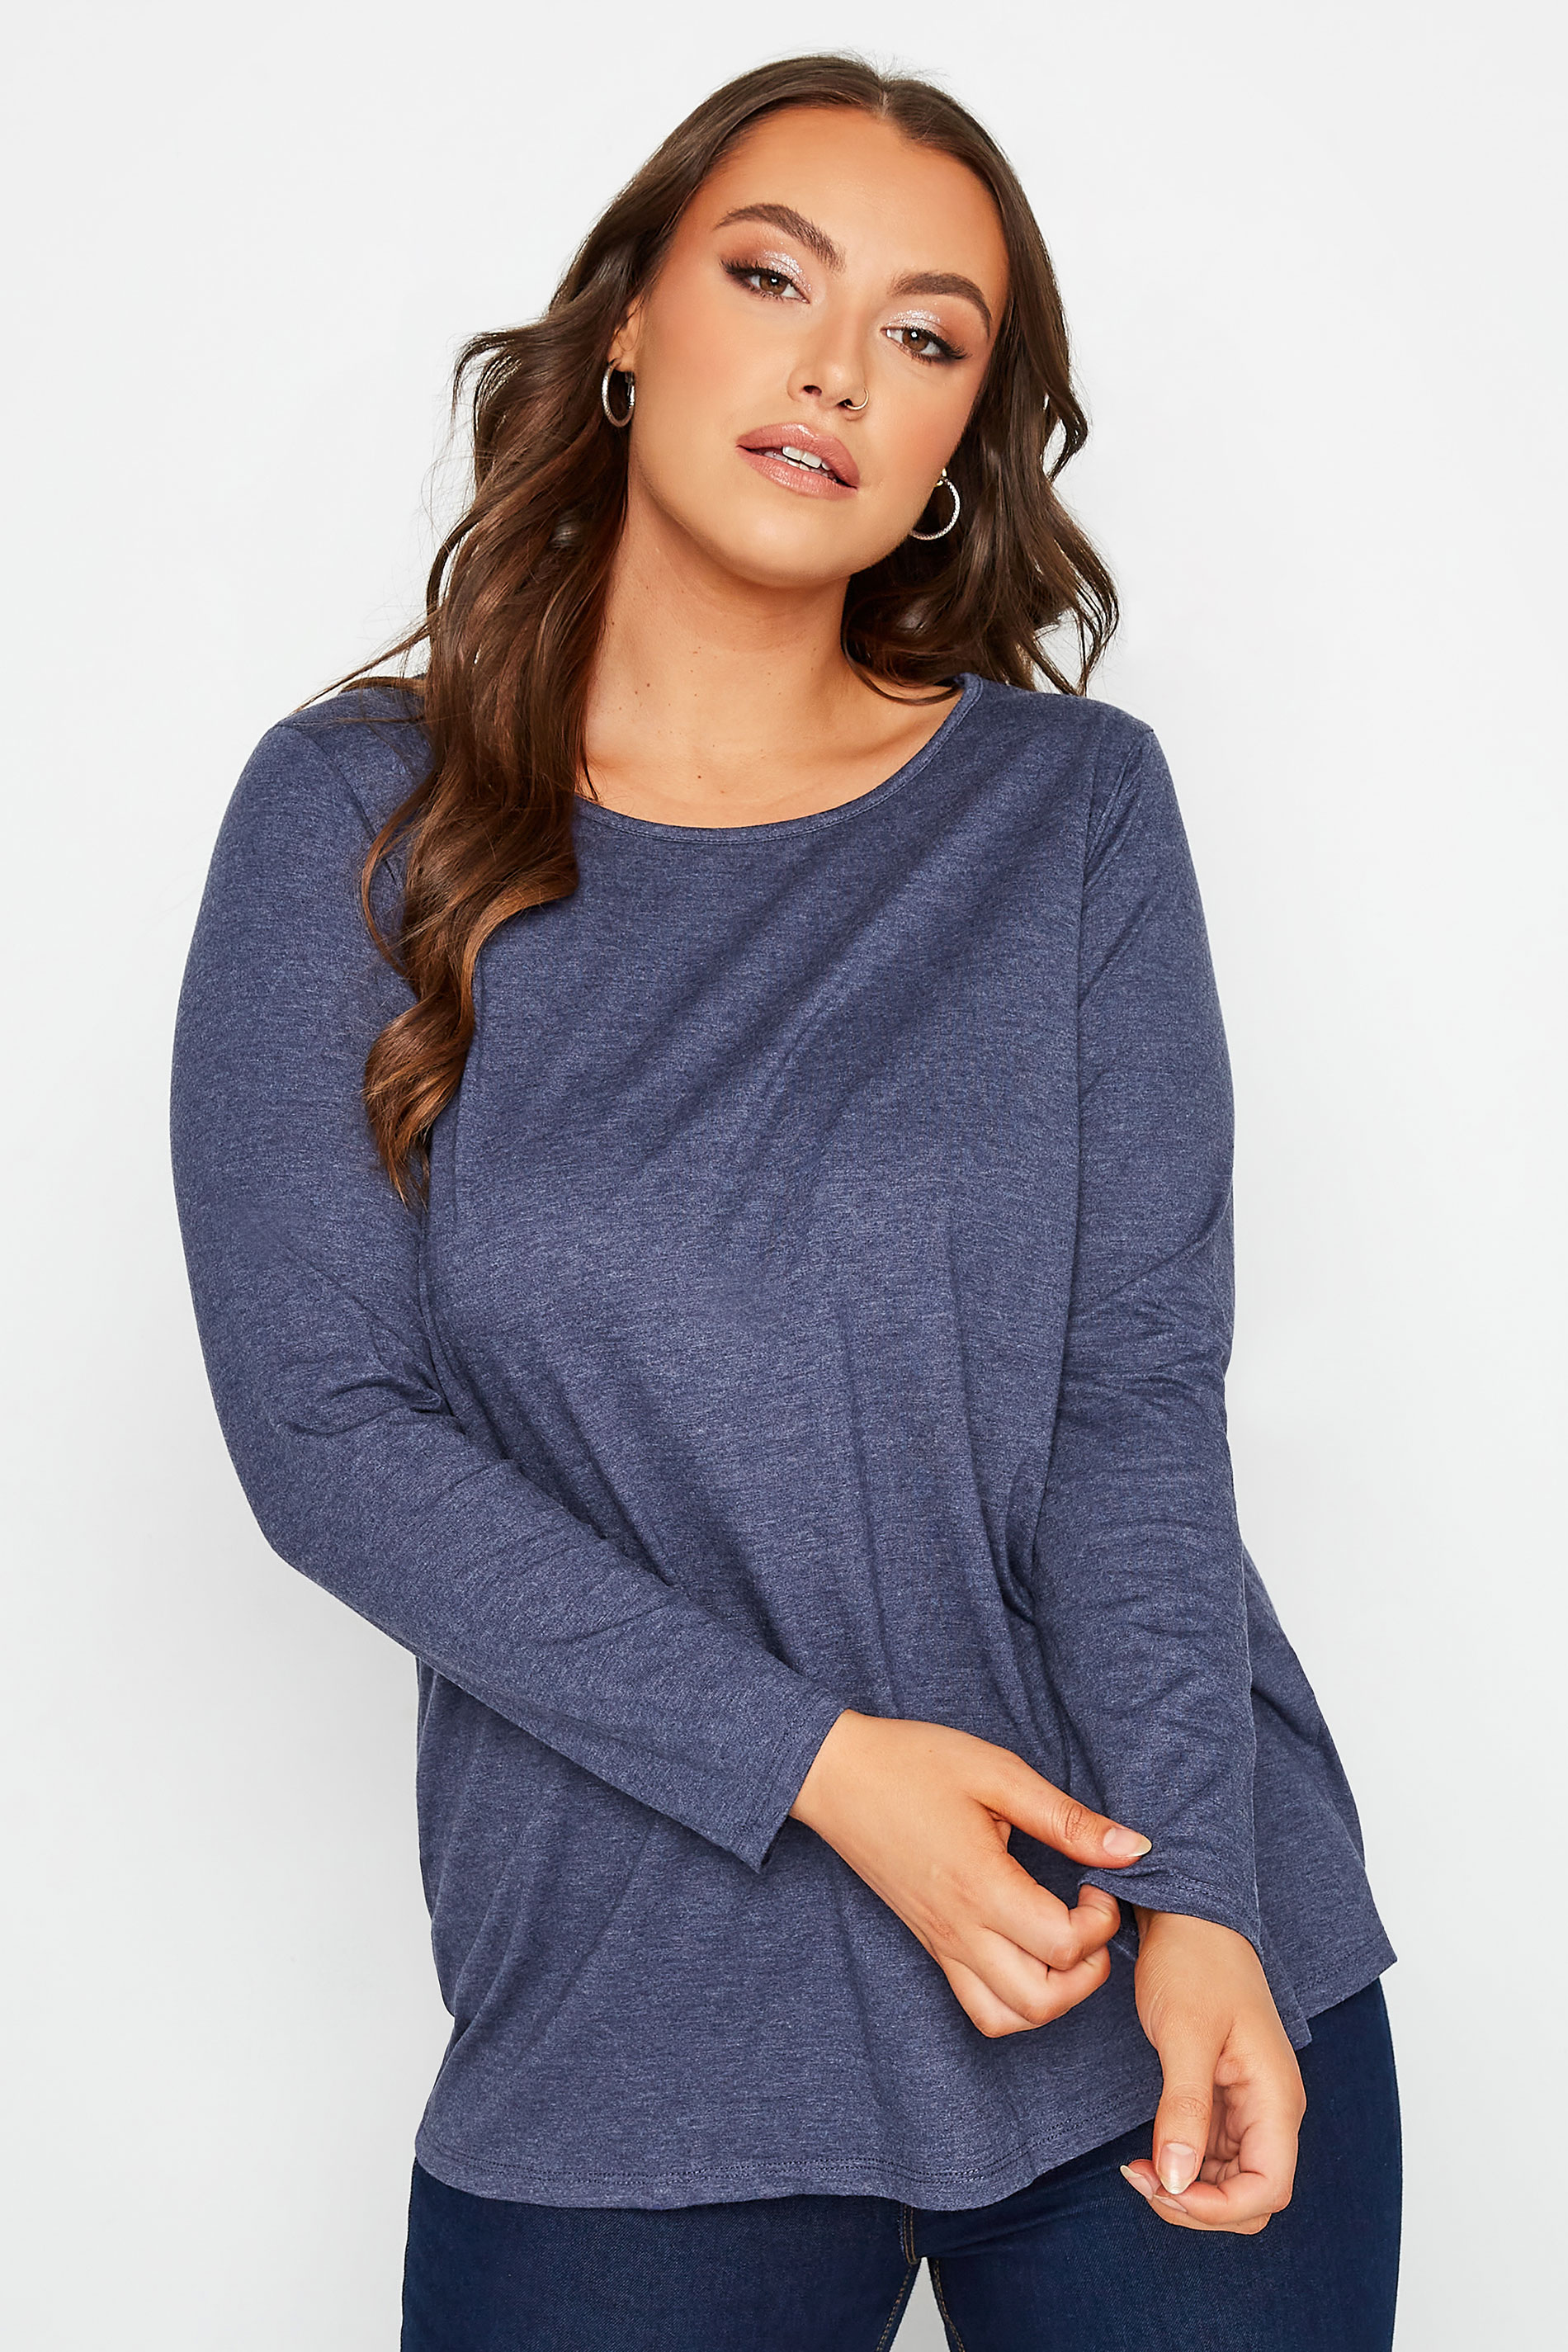 3 PACK Plus Size Black & Blue Long Sleeve Tops | Yours Clothing  2